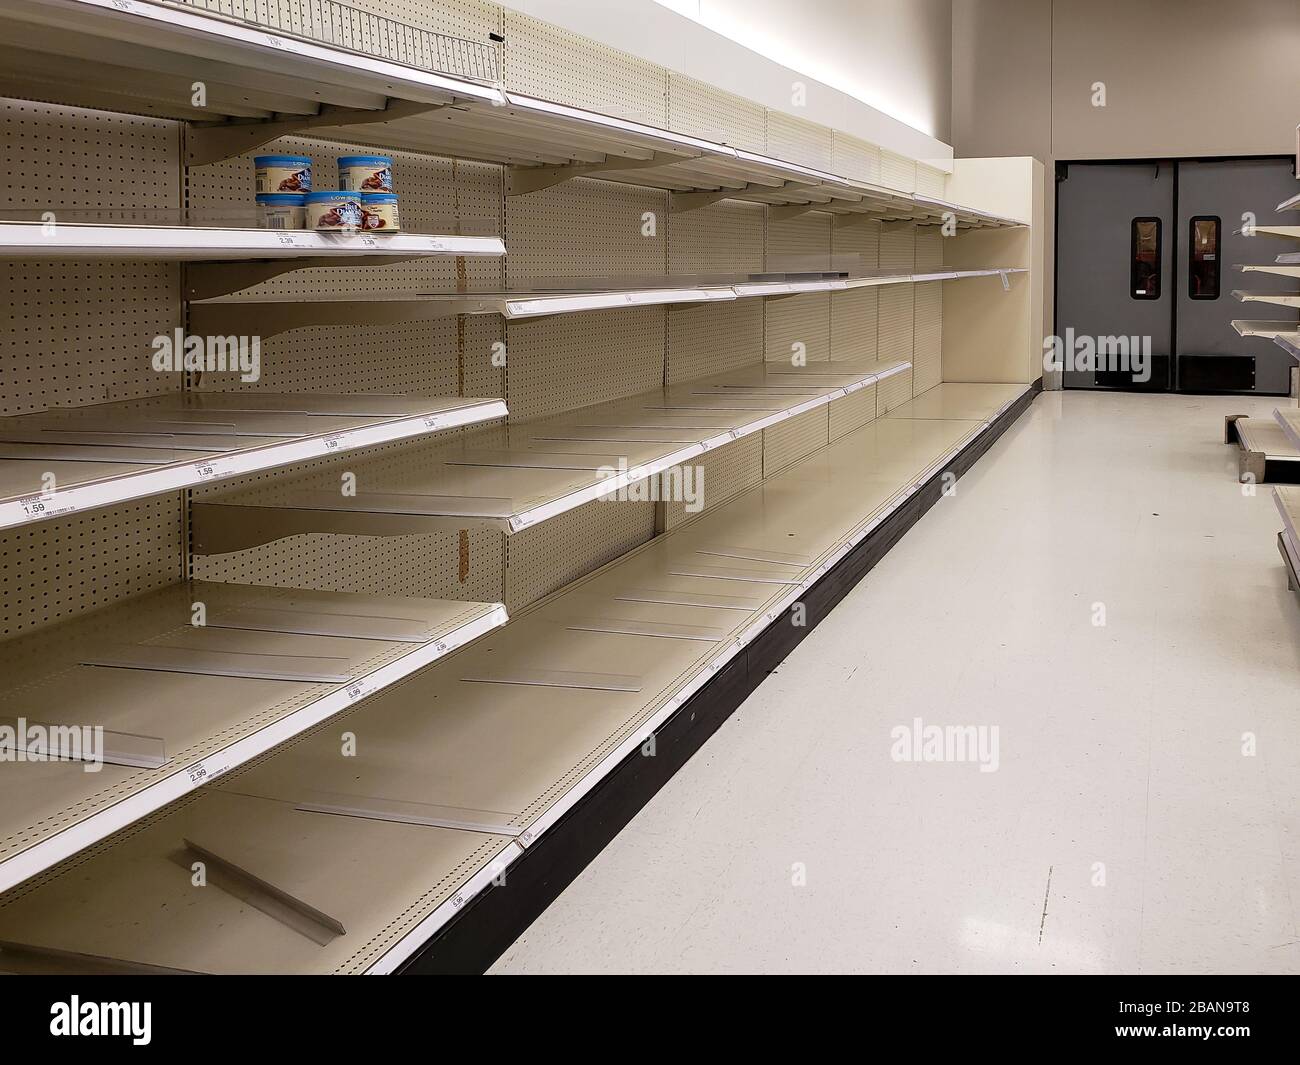 Virtually empty shelves where boxes of facial tissue and paper towels once stood at the back of a market in the San Francisco Bay Area. Oddly a few cans of nuts sit on one shelf out of place. Stock Photo